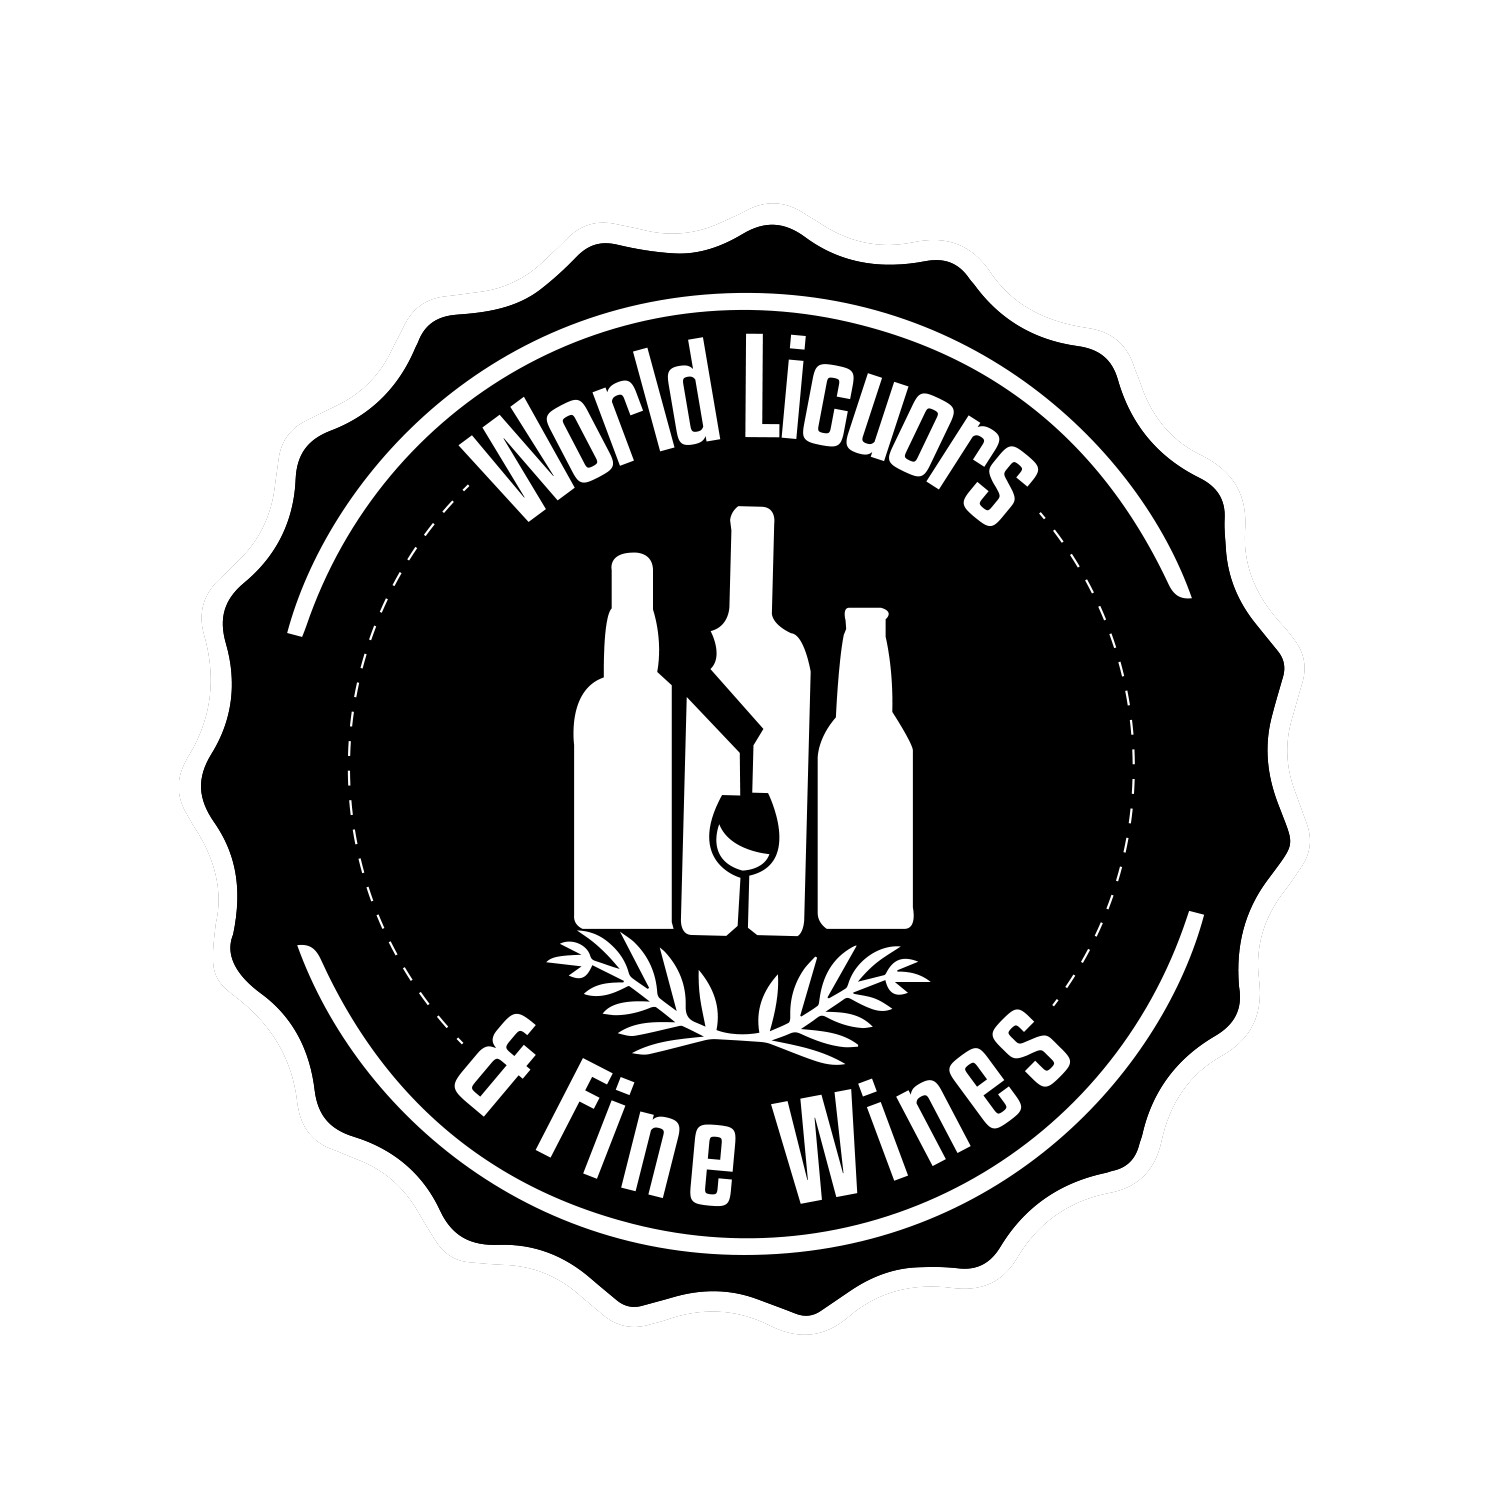 Introducing World Liquors and Fine Wines in Waldorf MD